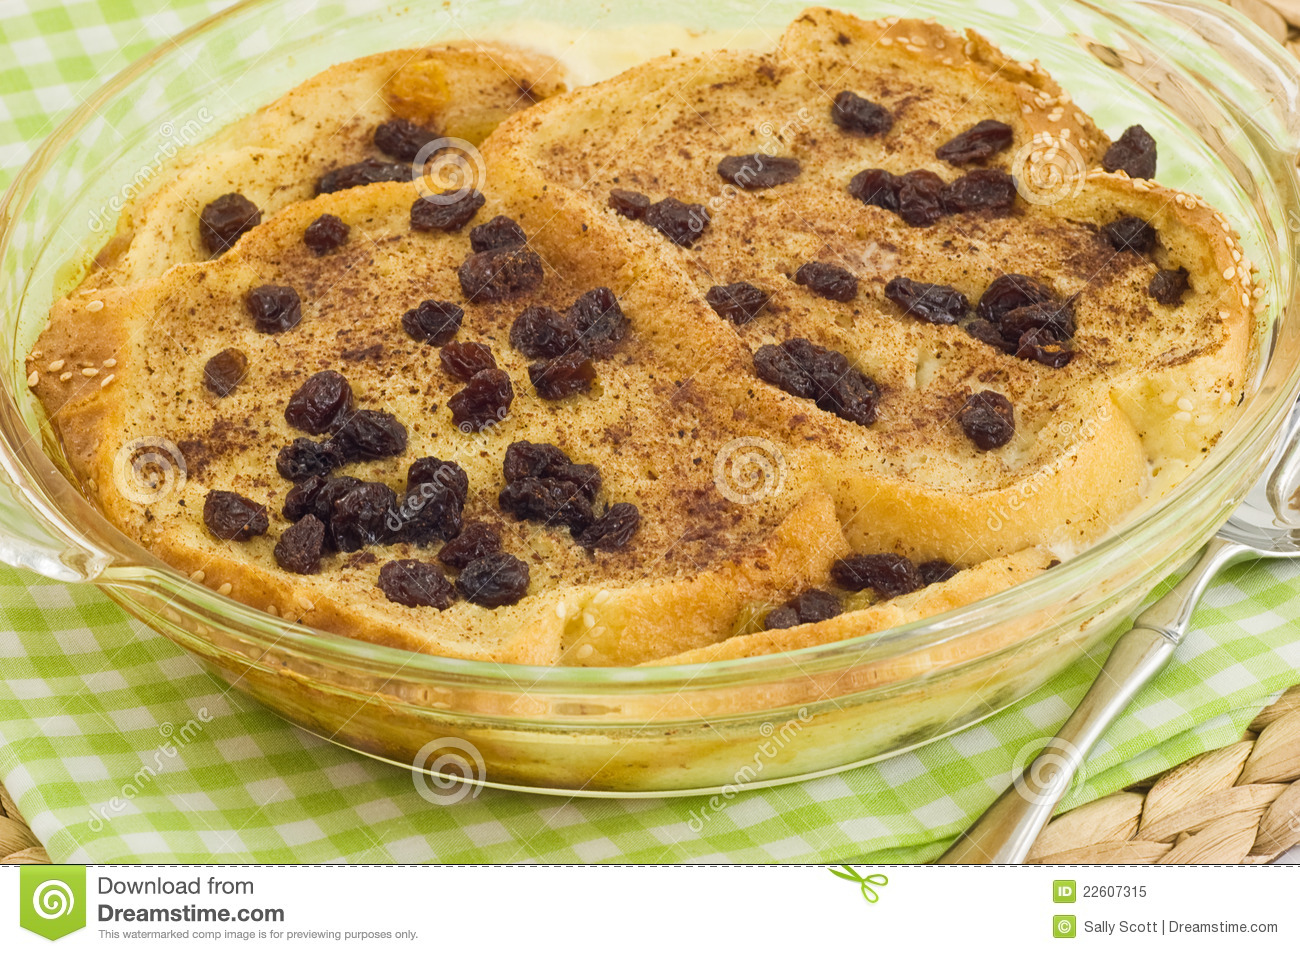 Bread Pudding Royalty Free Stock Photo   Image  22607315